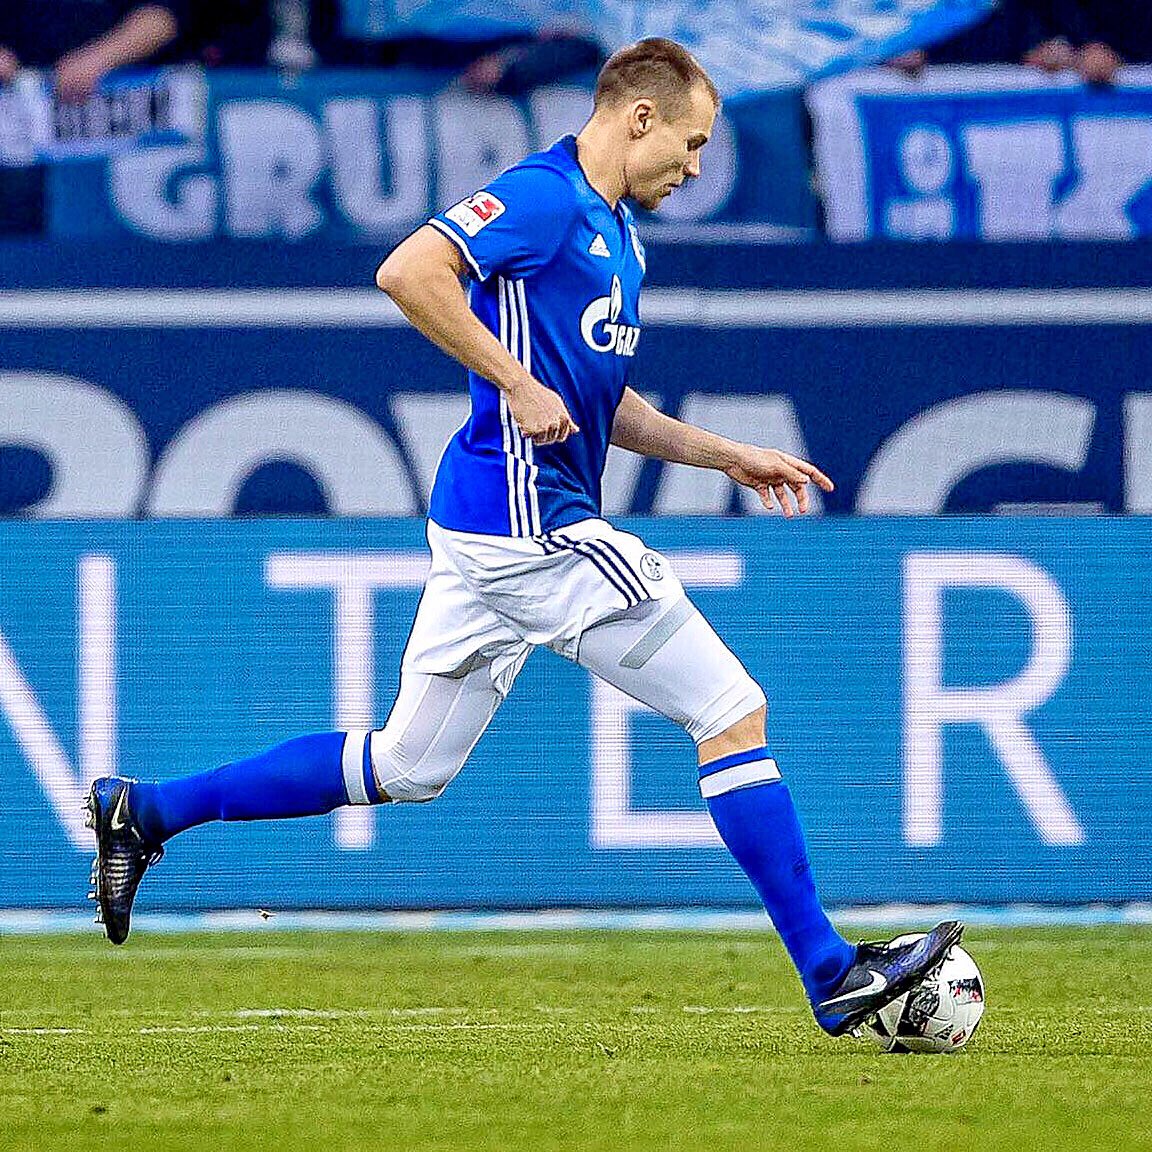 In the end we only got one point 👉 annoying result. #S04TSG https://t.co/Ar0IDoGGKu